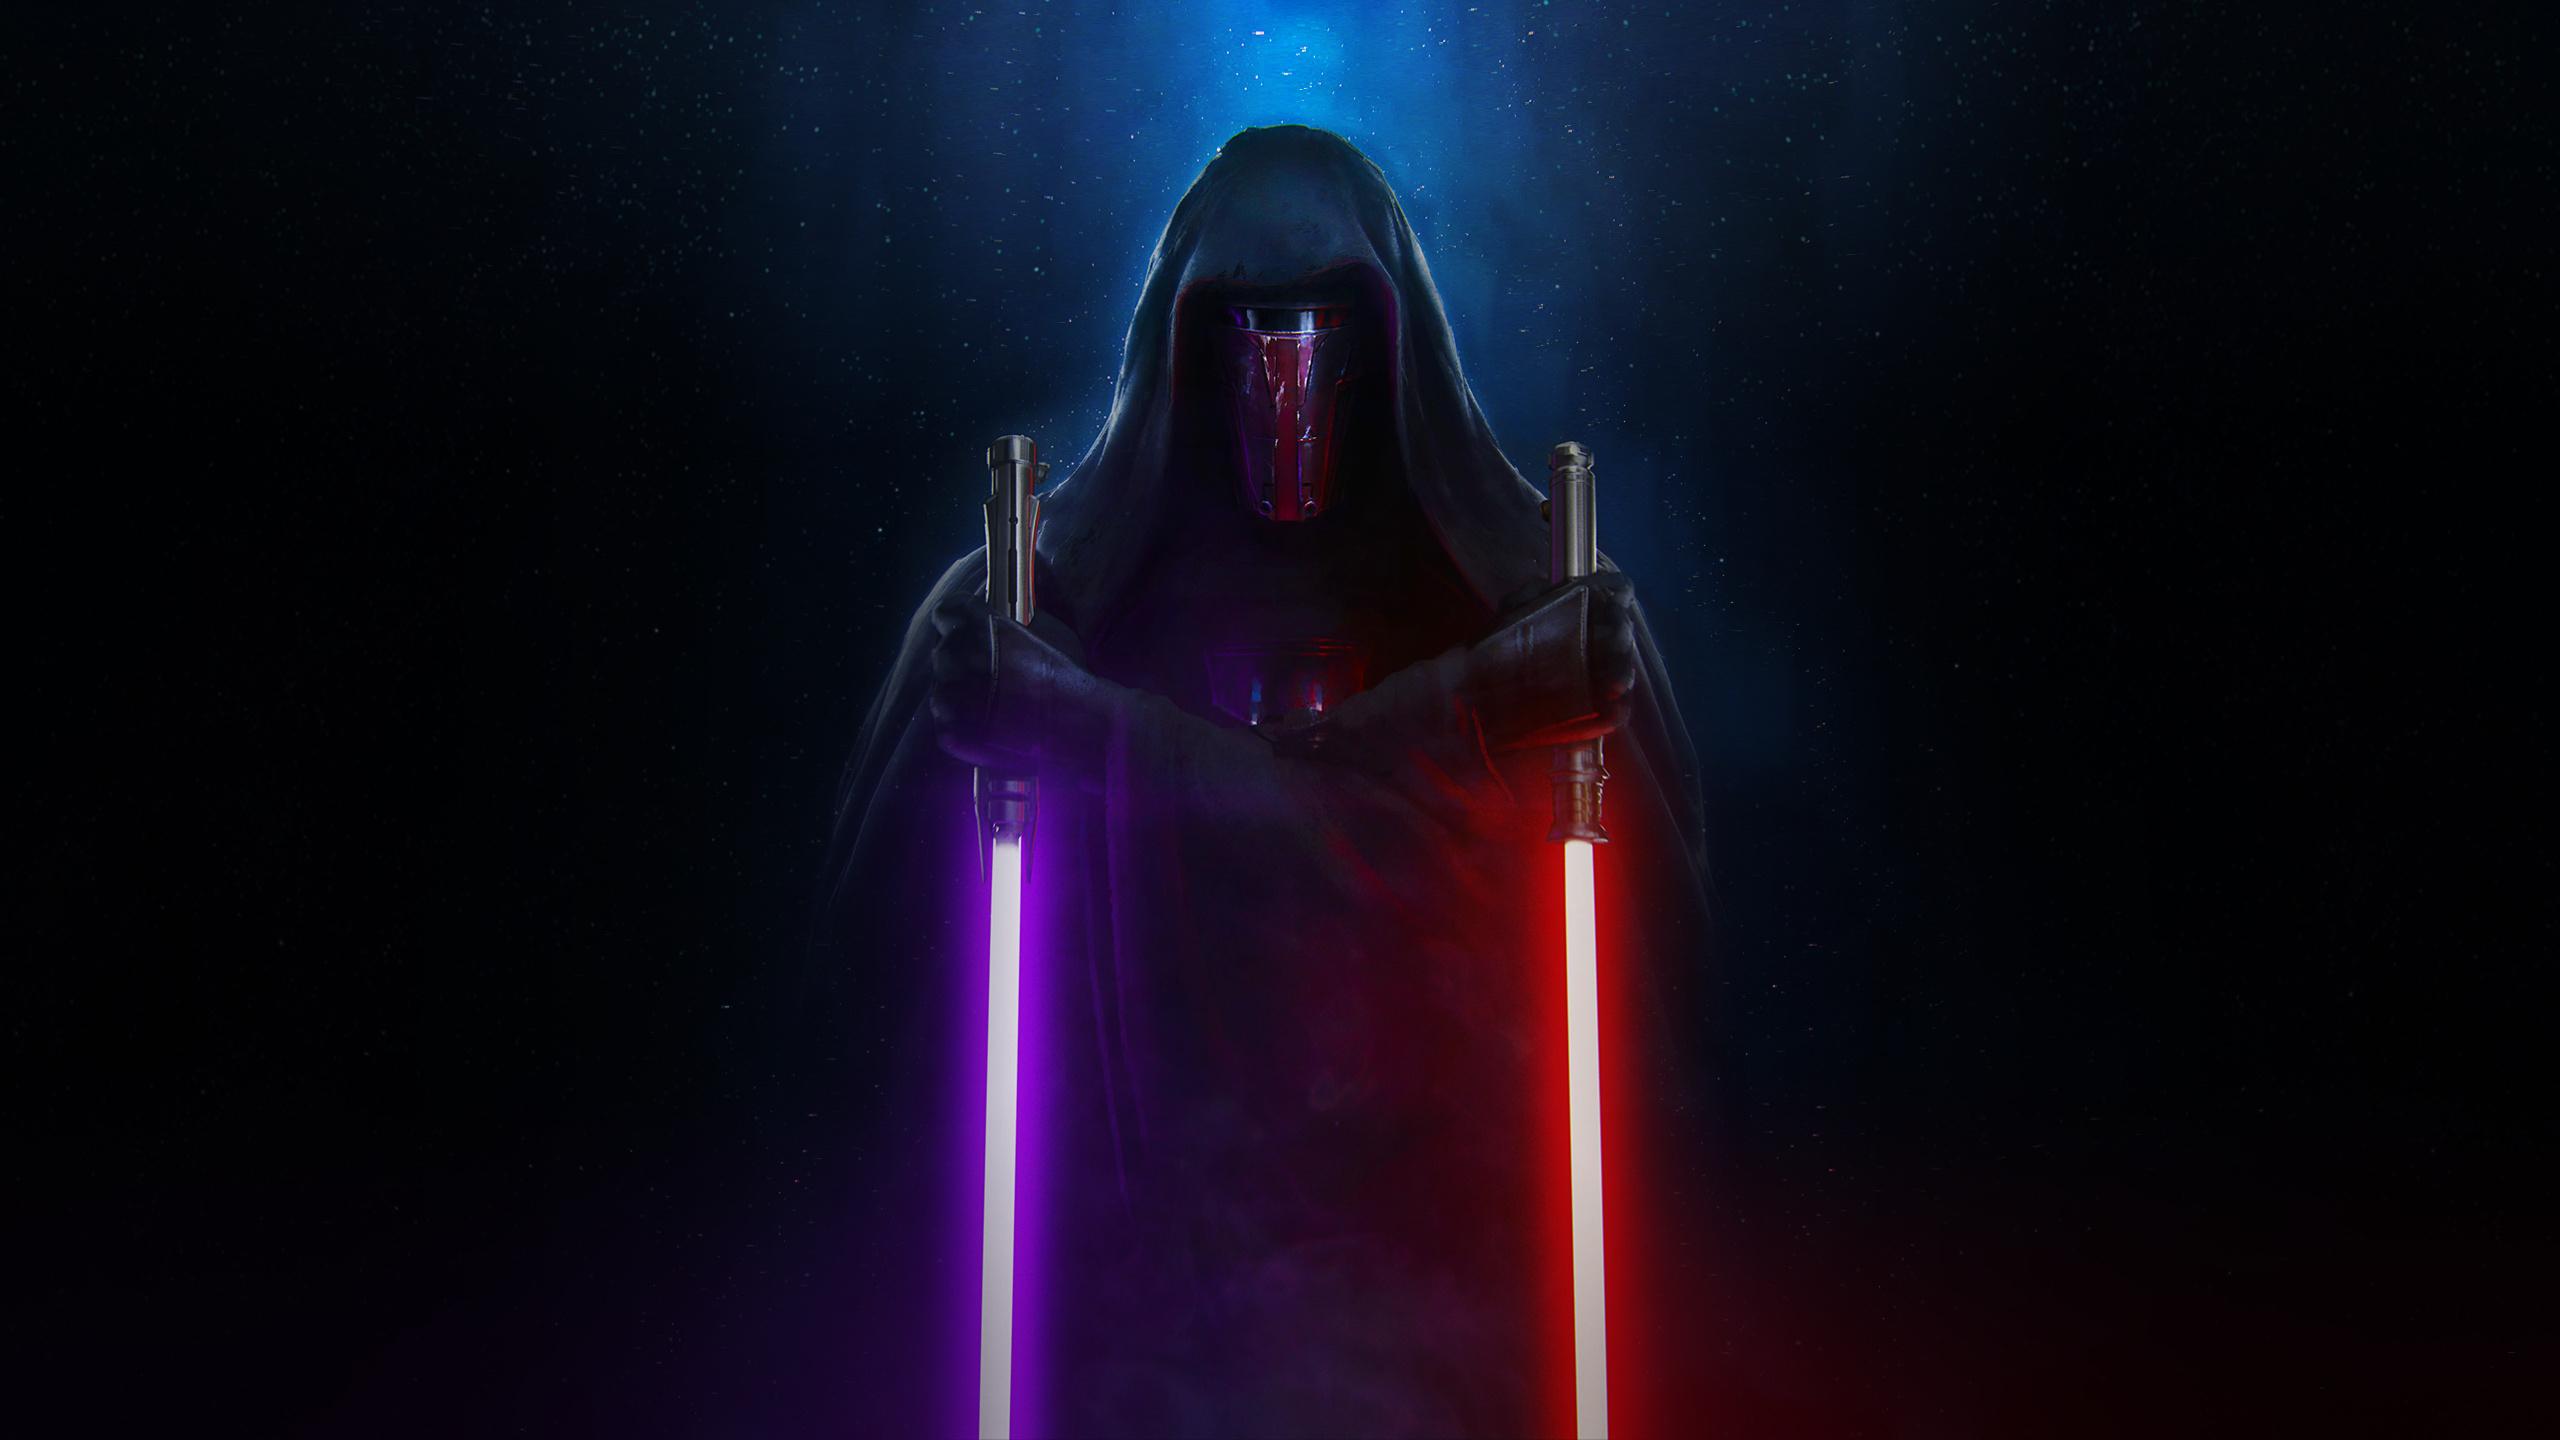 Darth Revan: Played pivotal roles as both Jedi and Sith in the Mandalorian Wars and the Jedi Civil War. 2560x1440 HD Background.